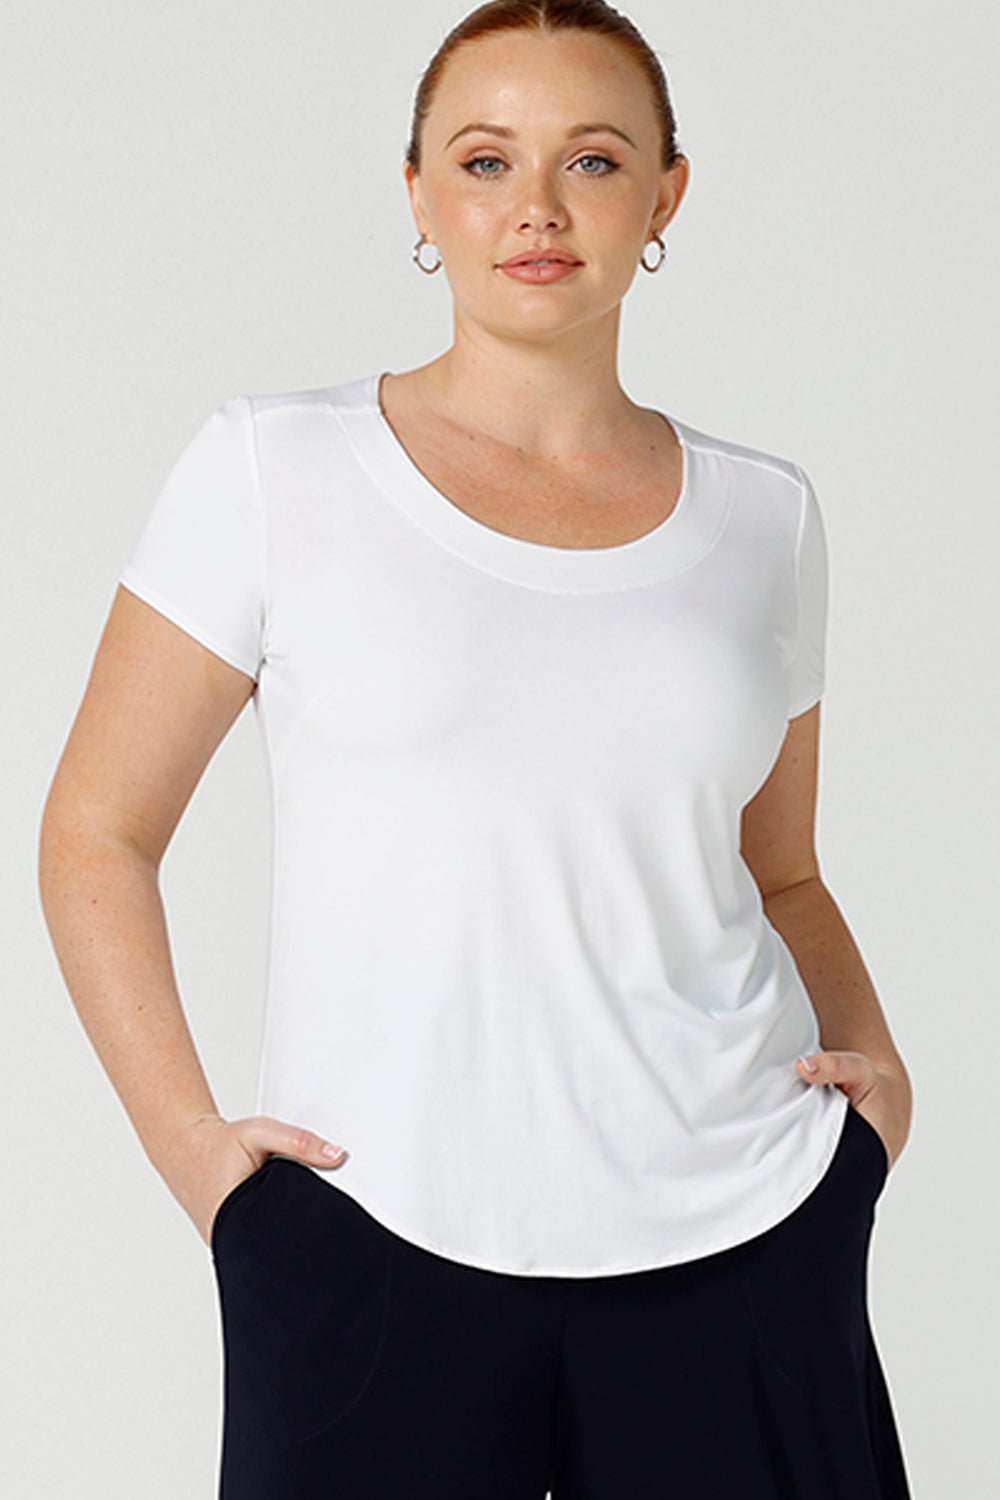 A good example of ladies clothing in Australia, this round neck, short sleeve top in white bamboo jersey is shown in a size 12 on a curvy woman.  If you're seeking a ladies casual top then this white tee top by Australian women's online clothing brand, Leina & Fleur,  is the perfect edition to your capsule wardrobe!